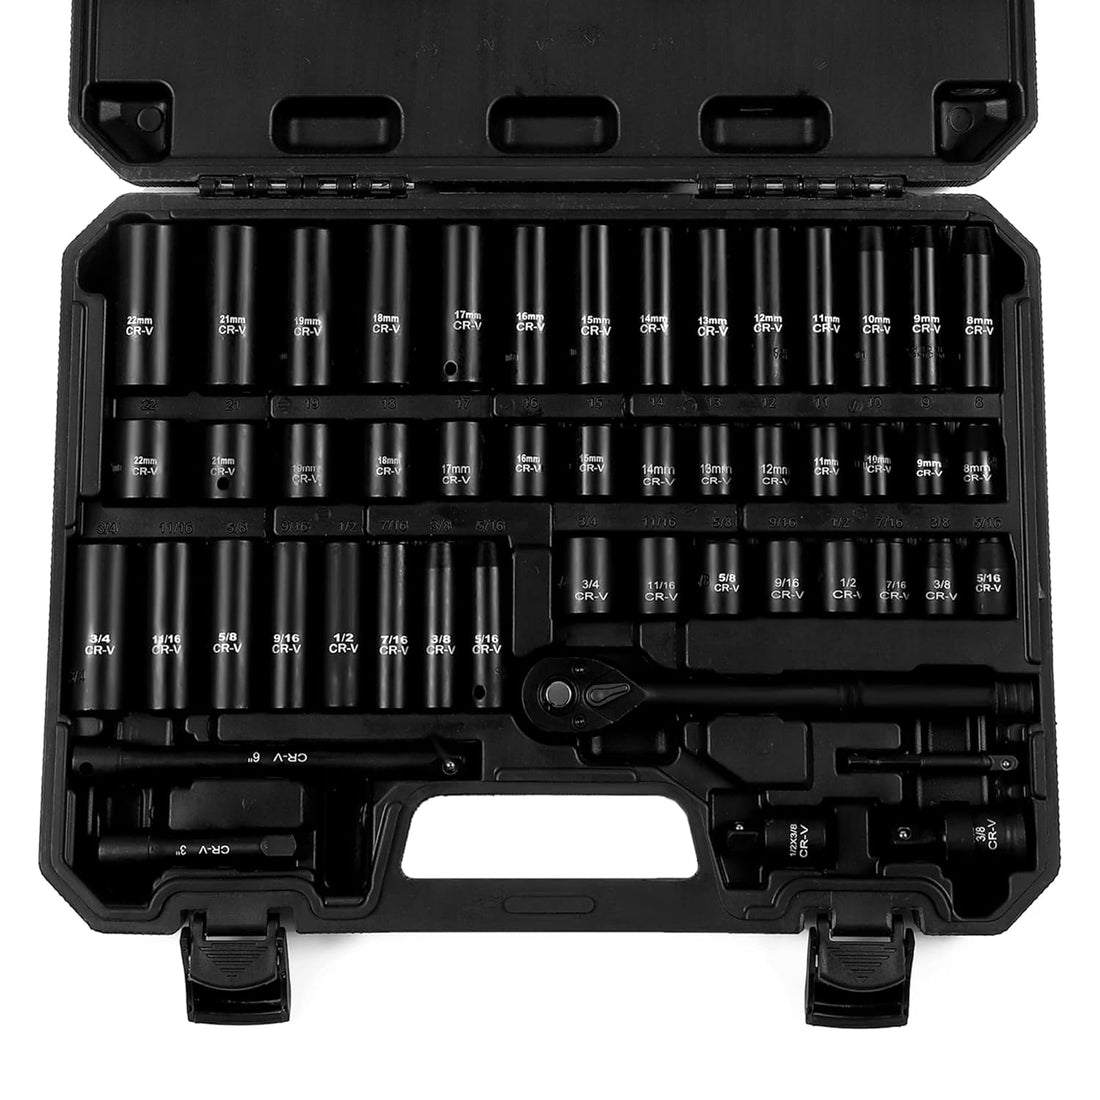 Reniteco 50-Piece 3/8" Drive Socket Set, SAE (5/16"-3/4") & Metric (8mm-22mm), Deep & Shallow, 72-Teeth Ratchet Wrench, Extension Bars, 1/2" F to 3/8" M Reducer, Universal Joint & Power Drill Adapter